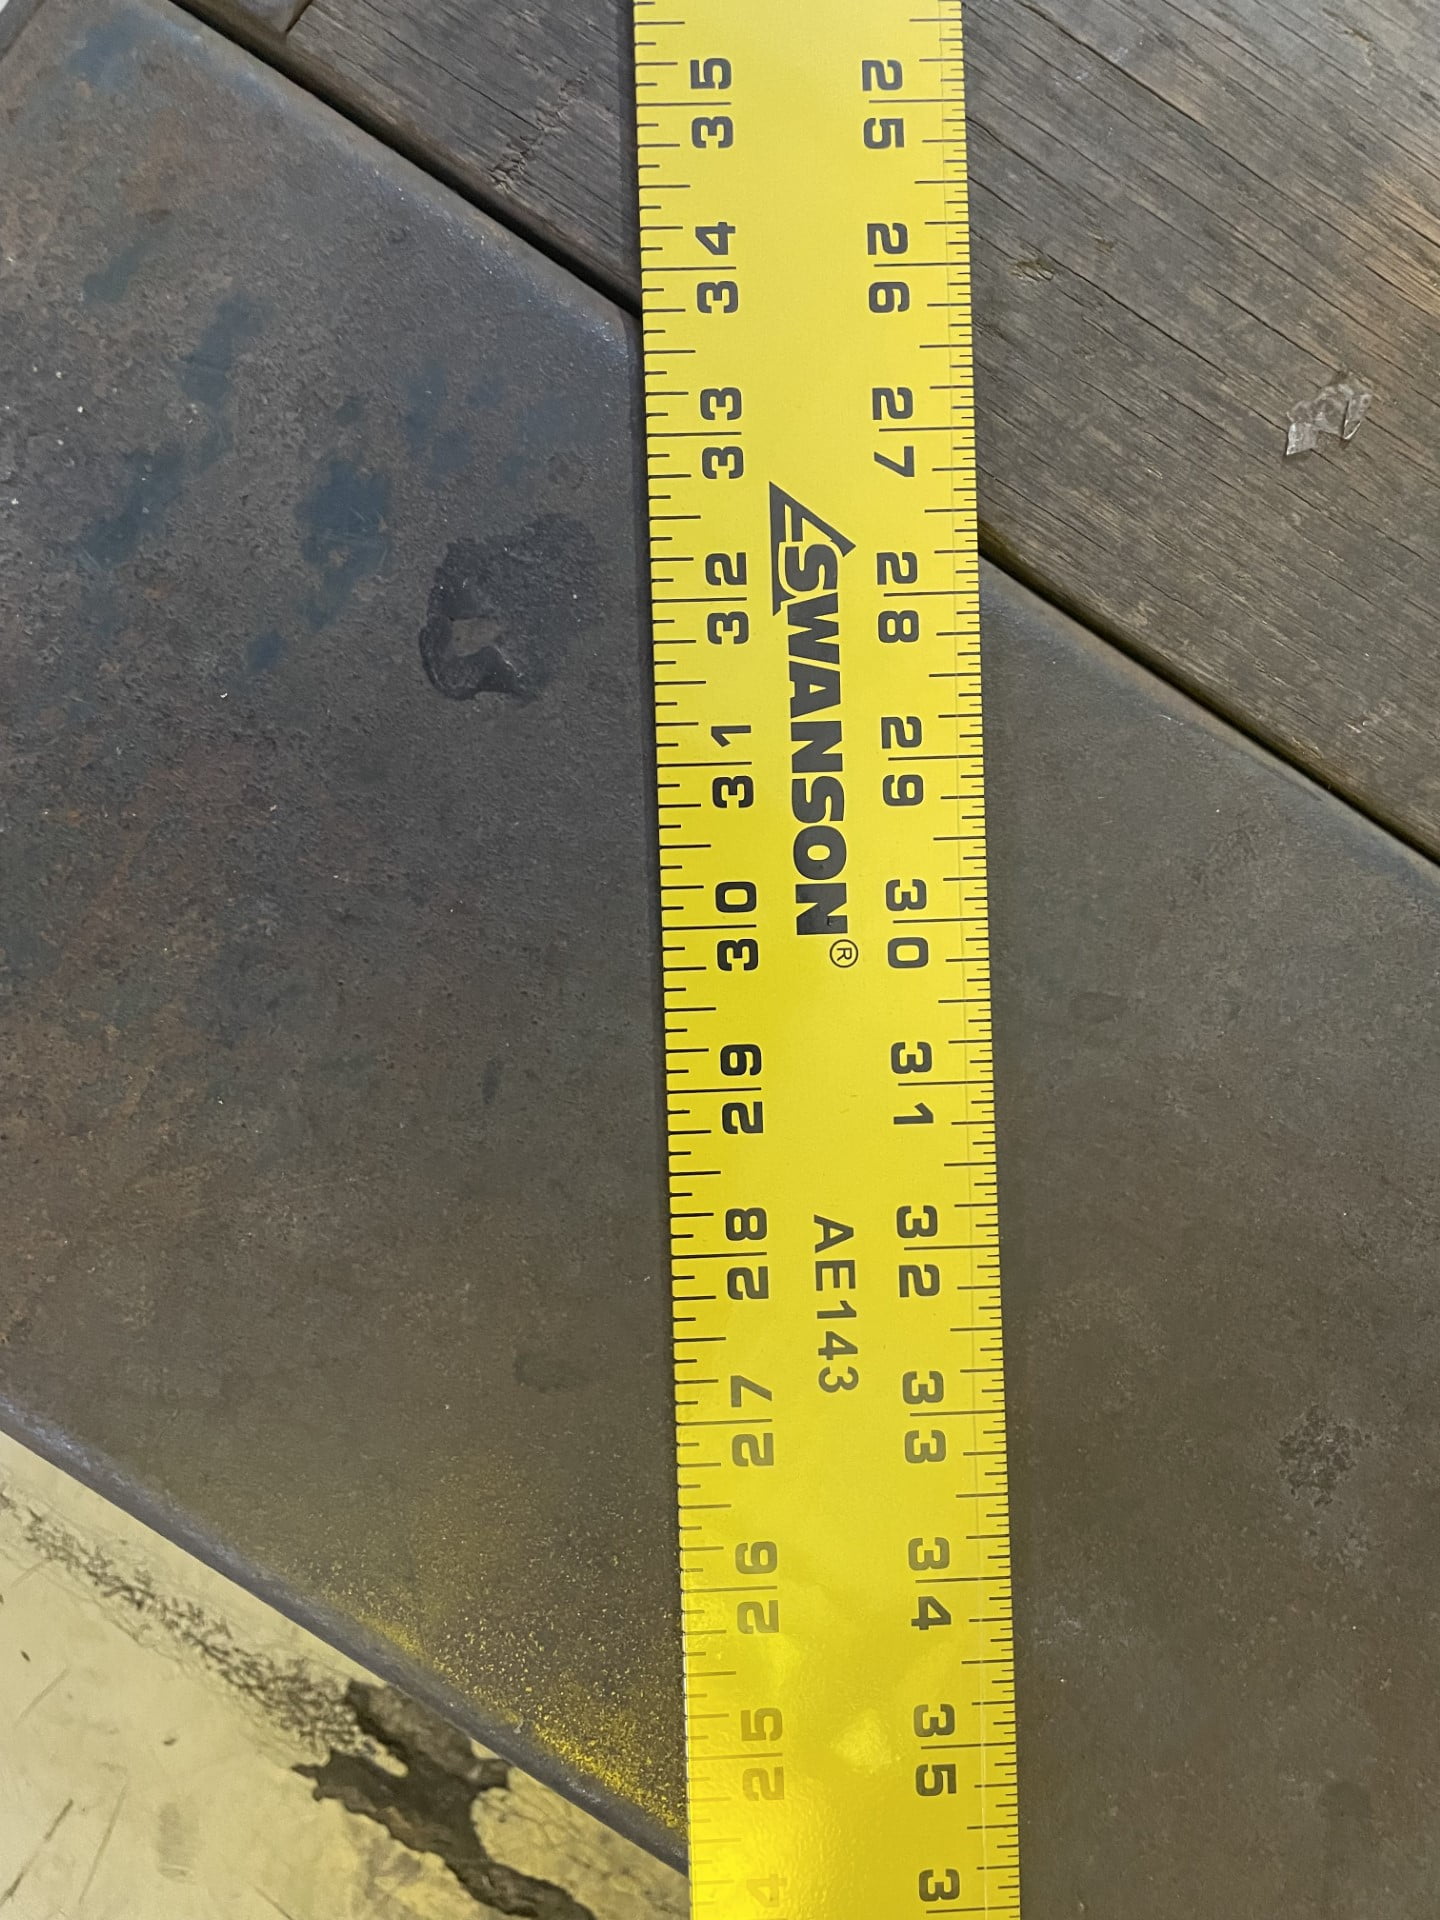 Swanson Tool AE141 36-Inch Yardstick, Yellow - Construction Rulers